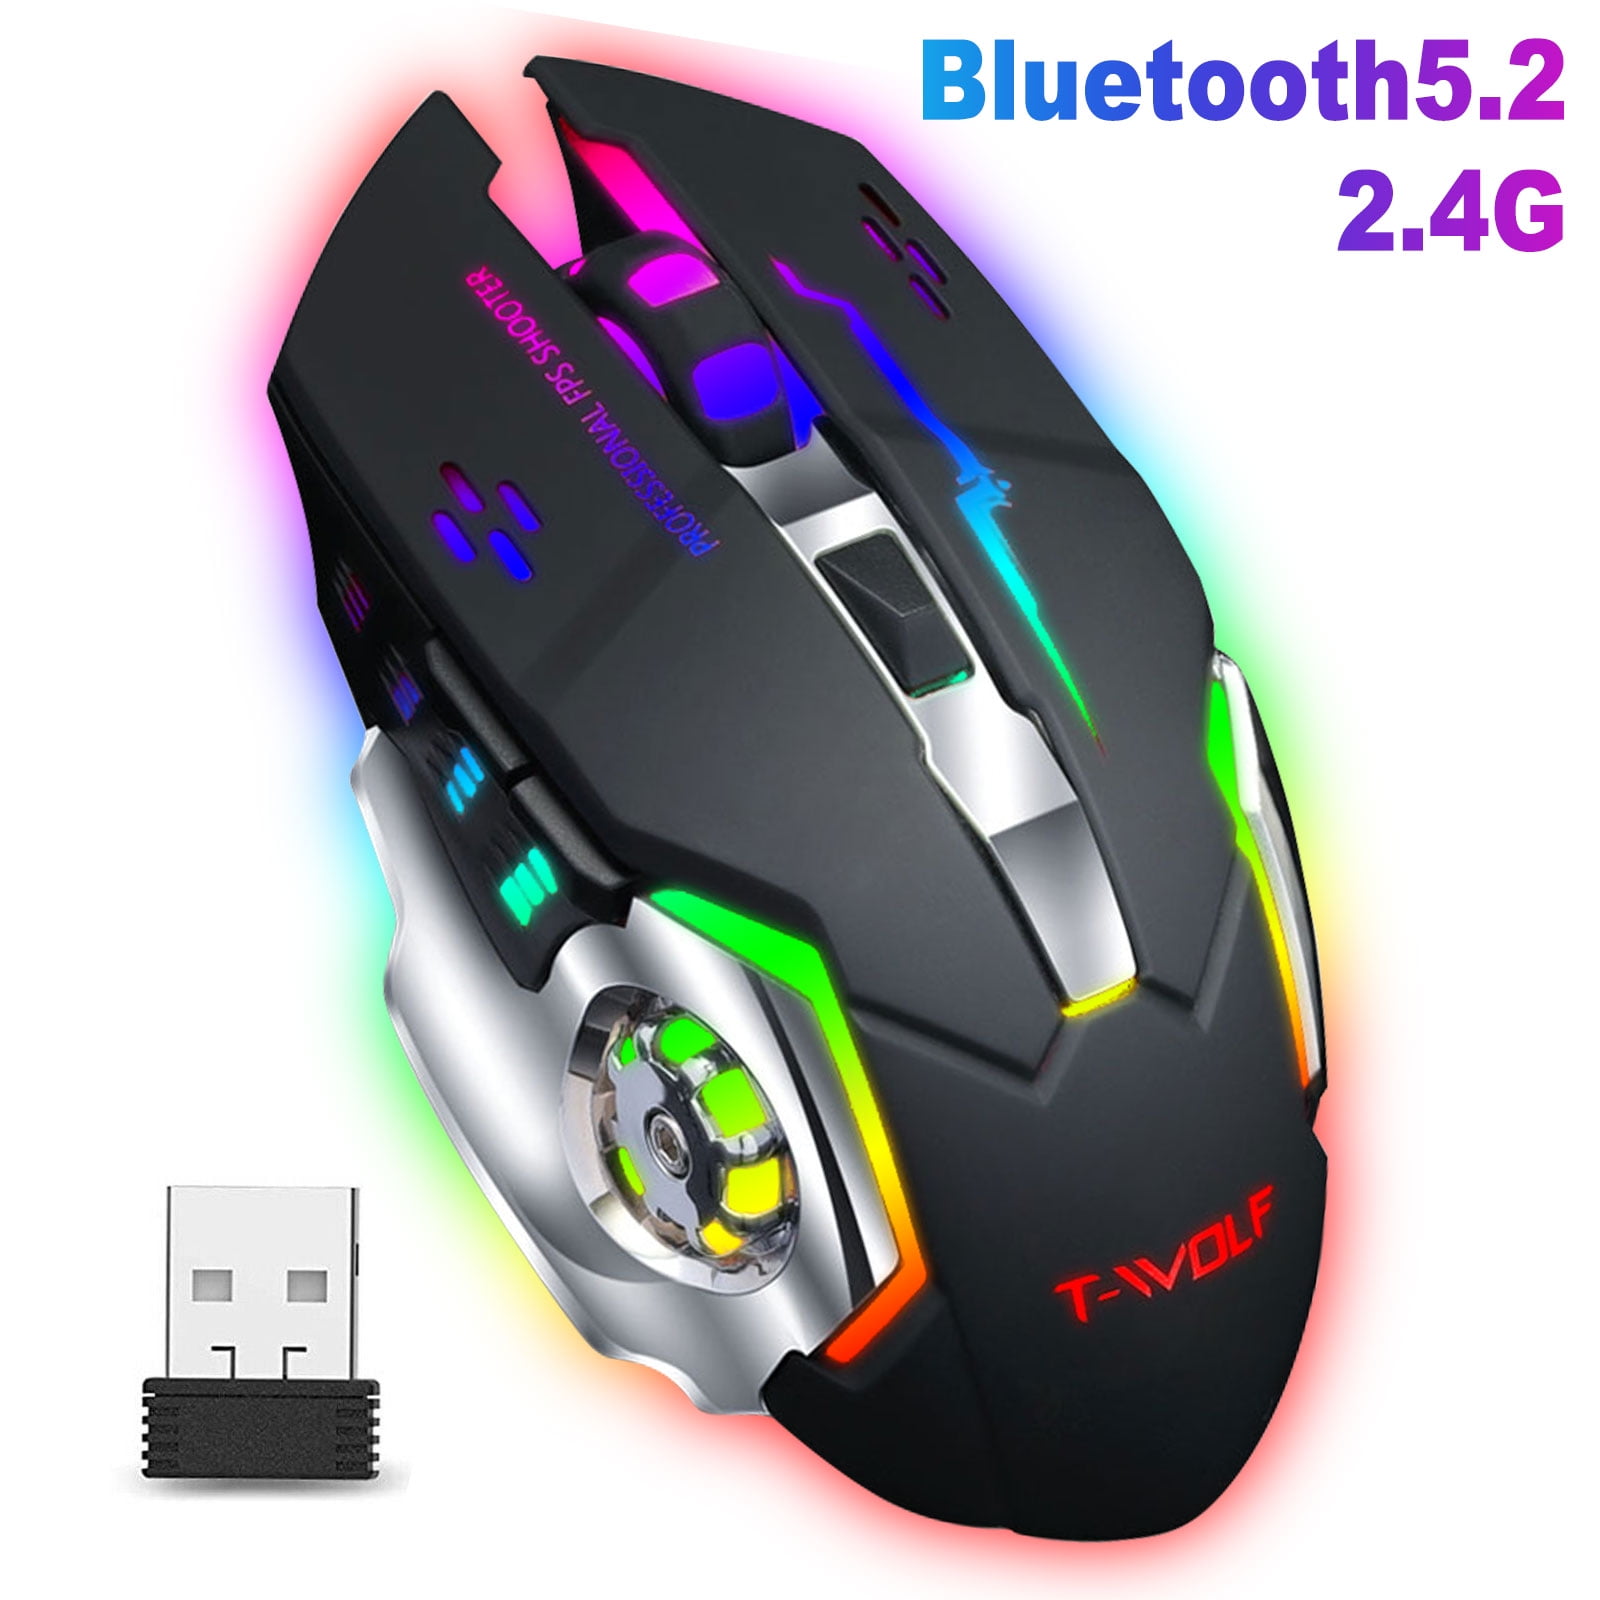 Alloet New 2.4G USB Optical Wireless Mouse 5 Buttons for Computer Laptop Gaming Mice 